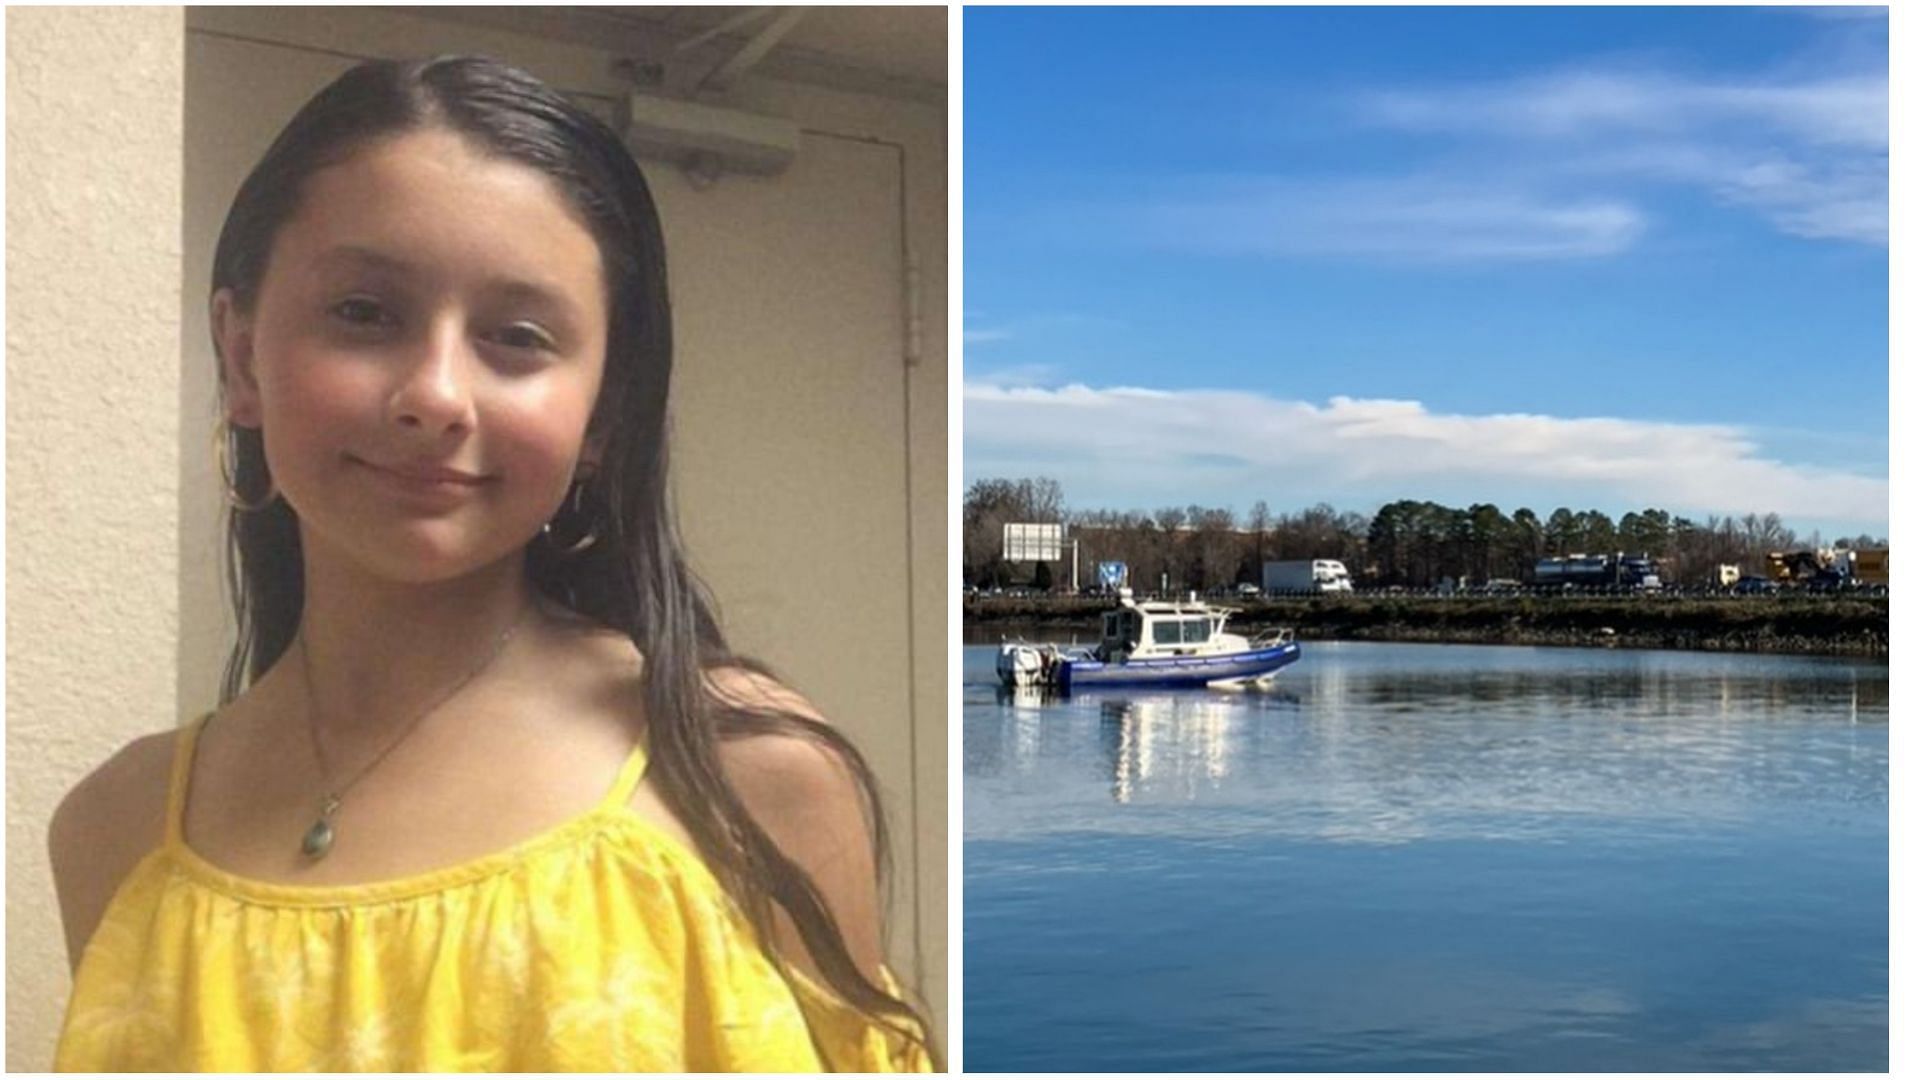 Cornelius Police Department has extended their search for 11-year-old Madalina Cojocari to a nearby lake (Images via FBI/Cornelius PD)